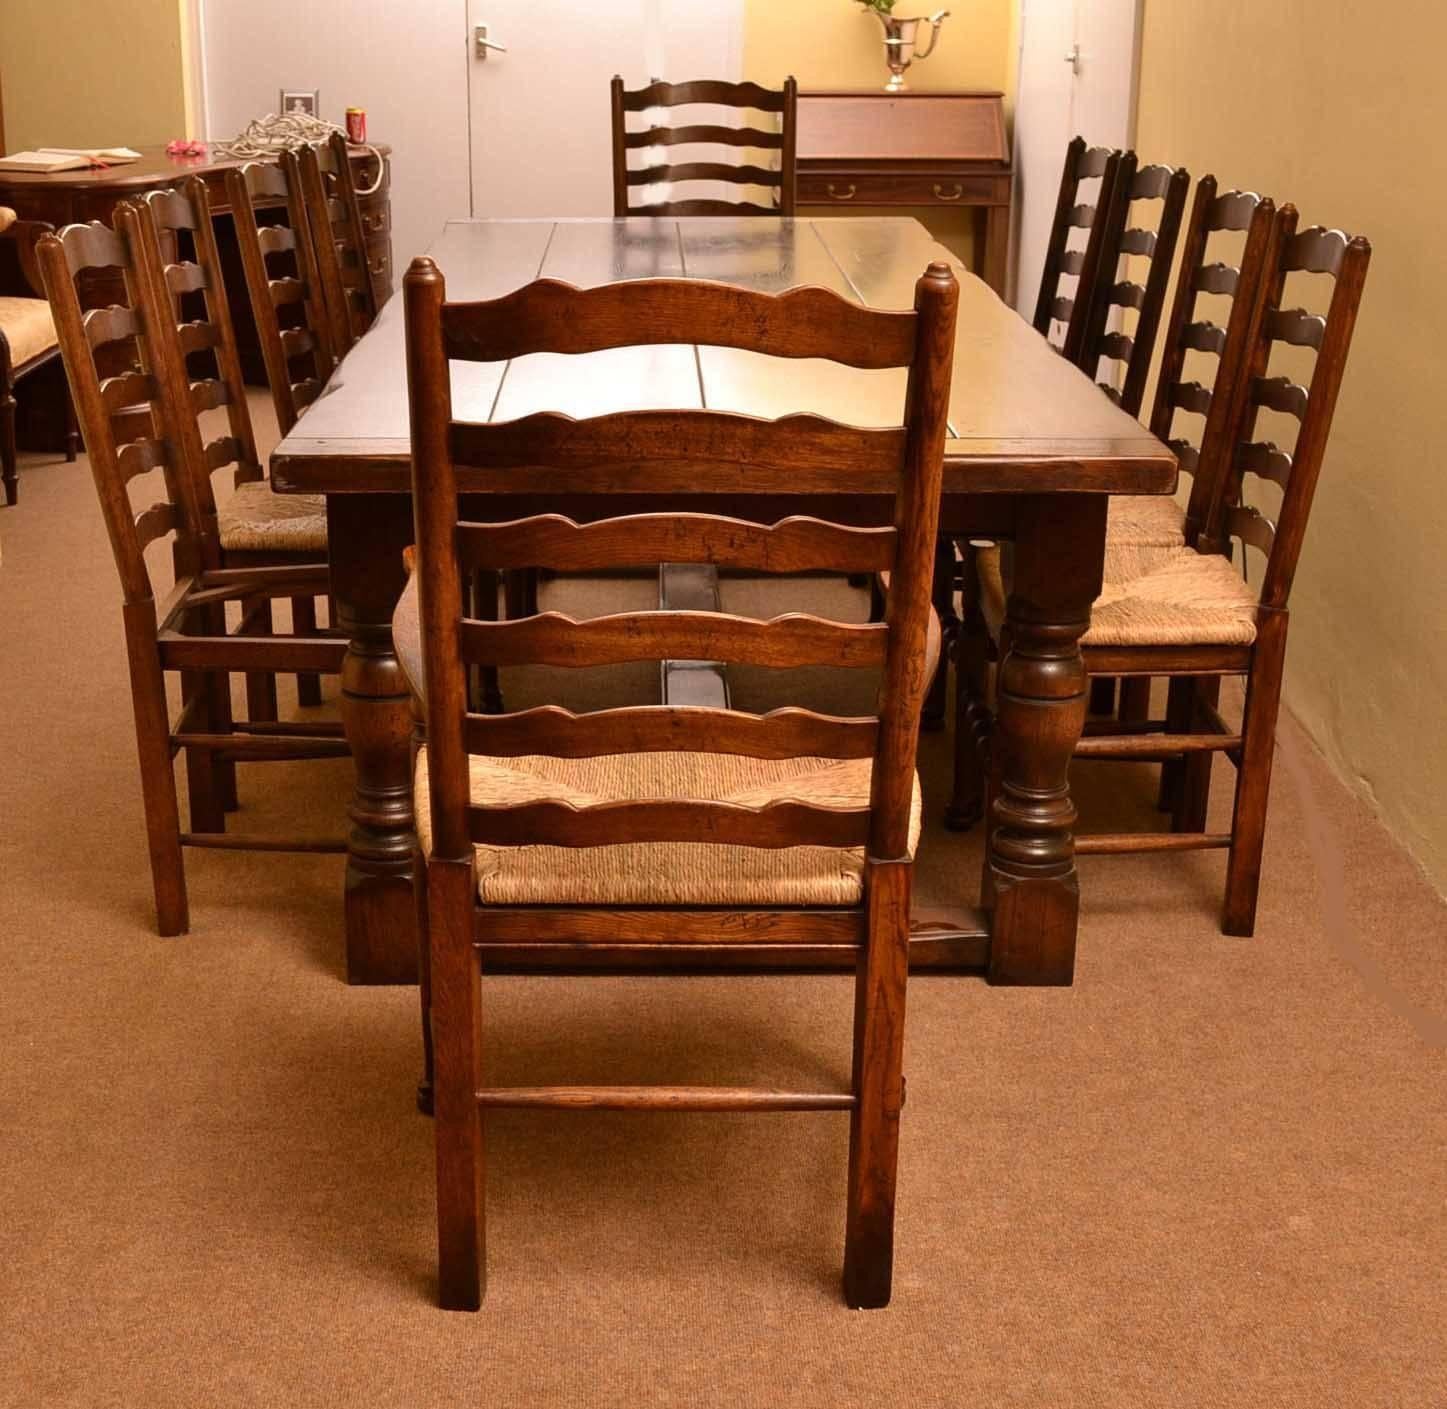 This new table has been hand crafted from solid oak in the Jacobean style using traditional methods in our workshops in Norfolk.

If the style, size or colour is not suitable for you we can hand craft a table to your requirements.

There is no